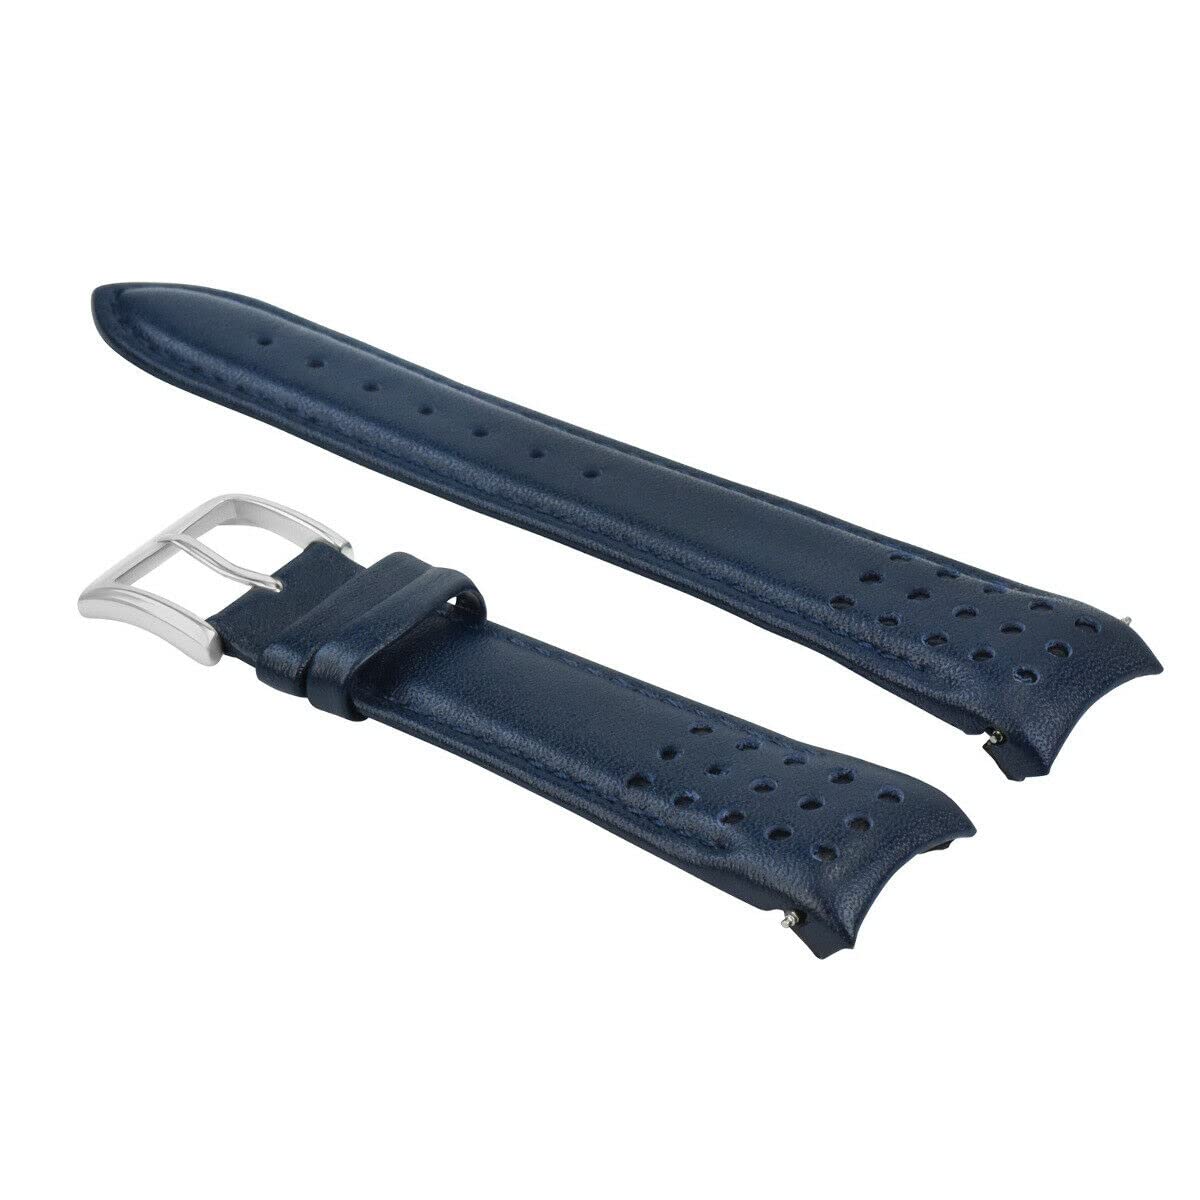 Ewatchparts 21MM CURVED END LEATHER WATCH BAND STRAP COMPATIBLE WITH CITIZEN ECO DRIVE PROMASTER BLUE